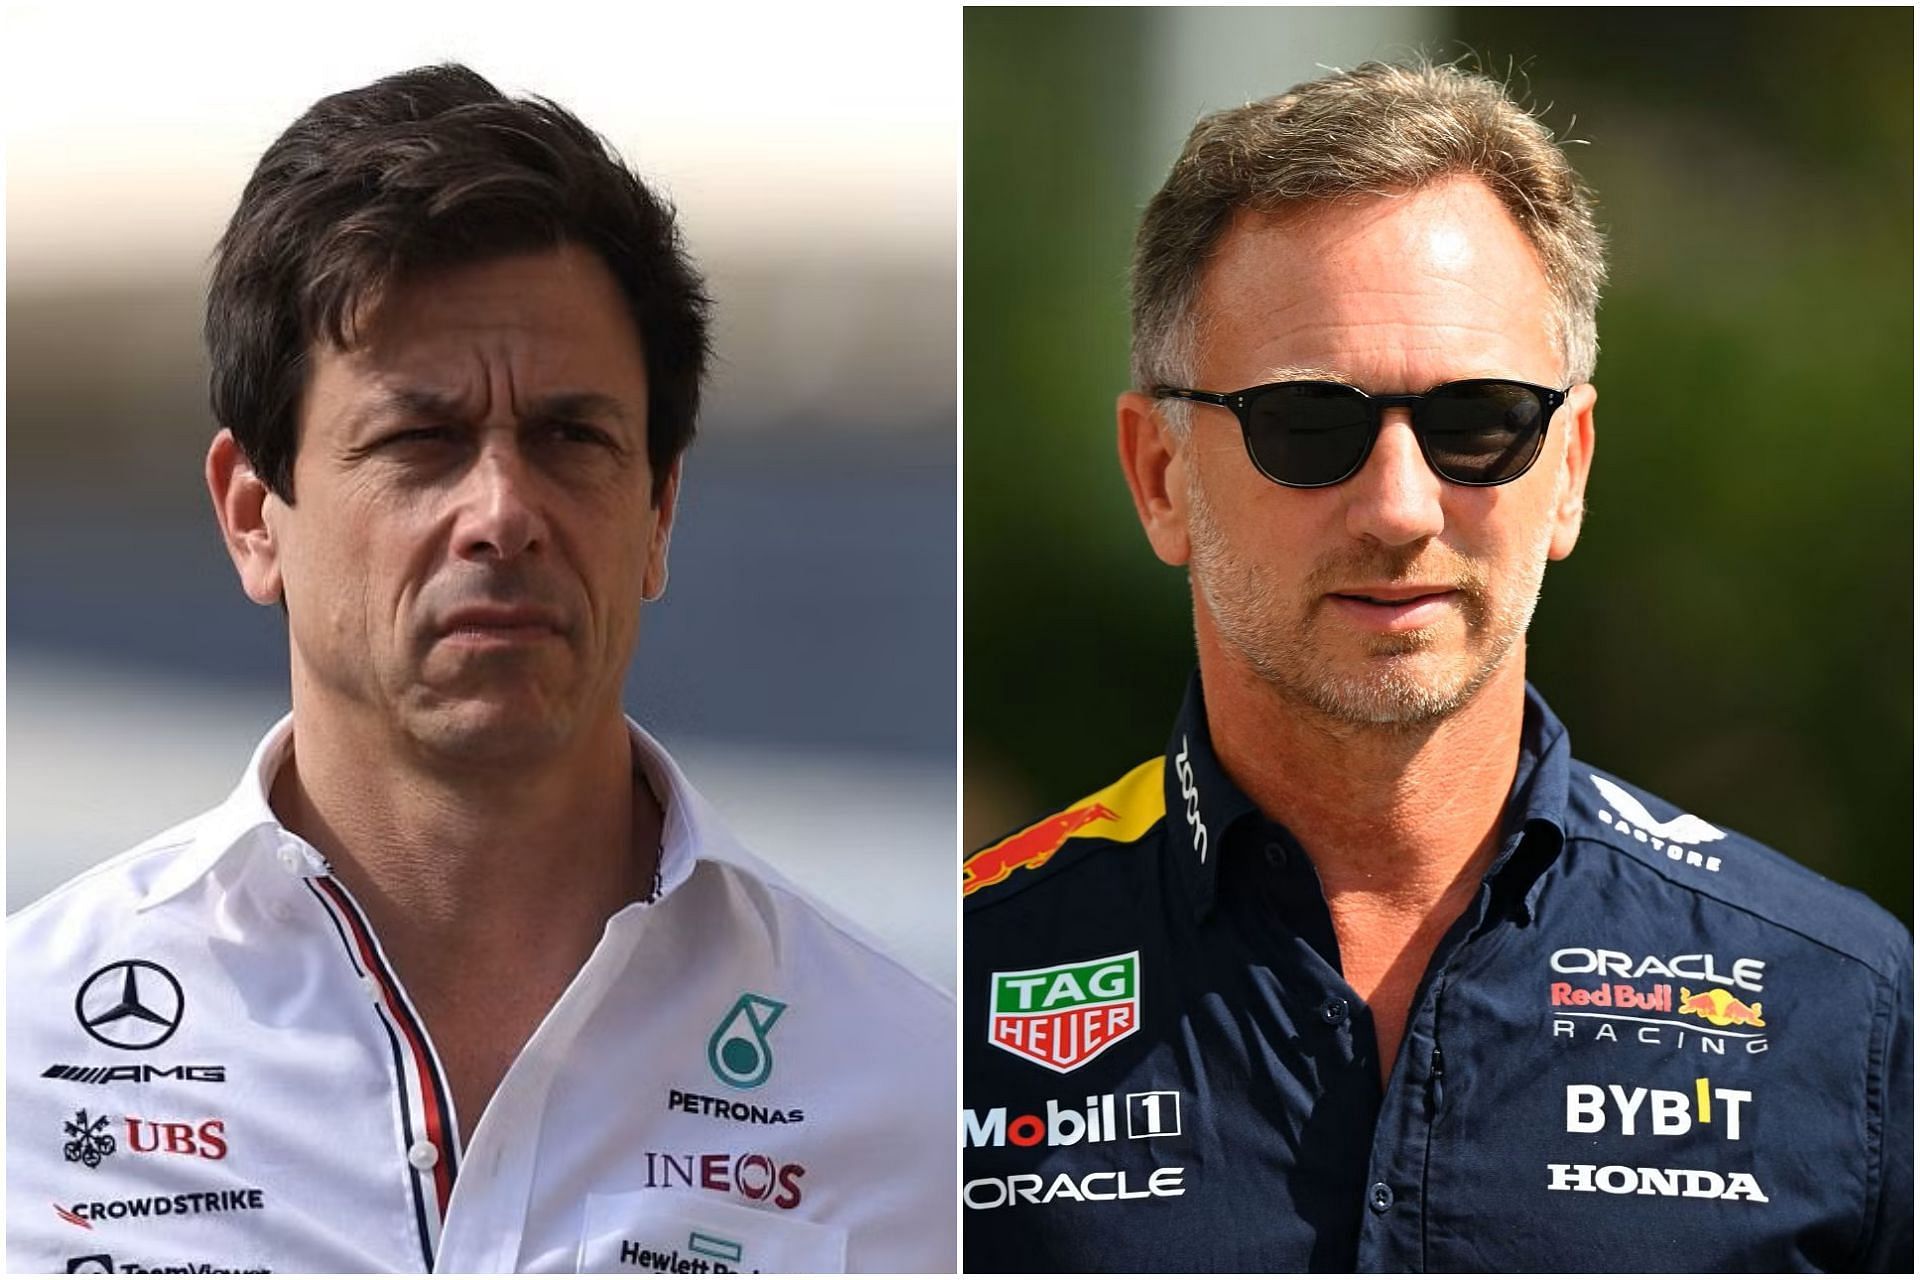 Toto Wolff (L) and Christian Horner (R) (Collage via Sportskeeda)